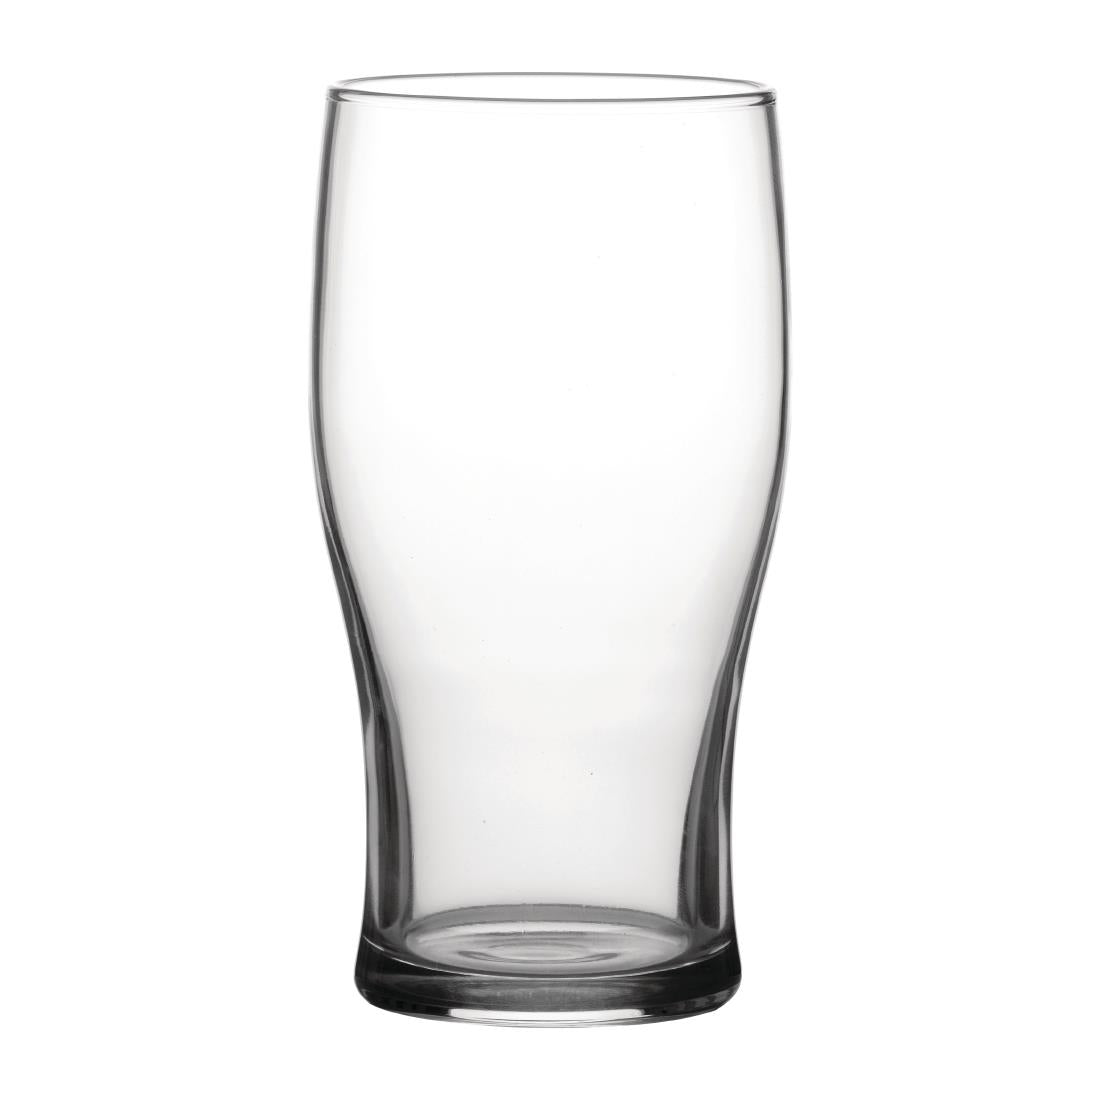 CY341 Utopia Tulip Beer Glasses 570ml CE Marked (Pack of 48) JD Catering Equipment Solutions Ltd